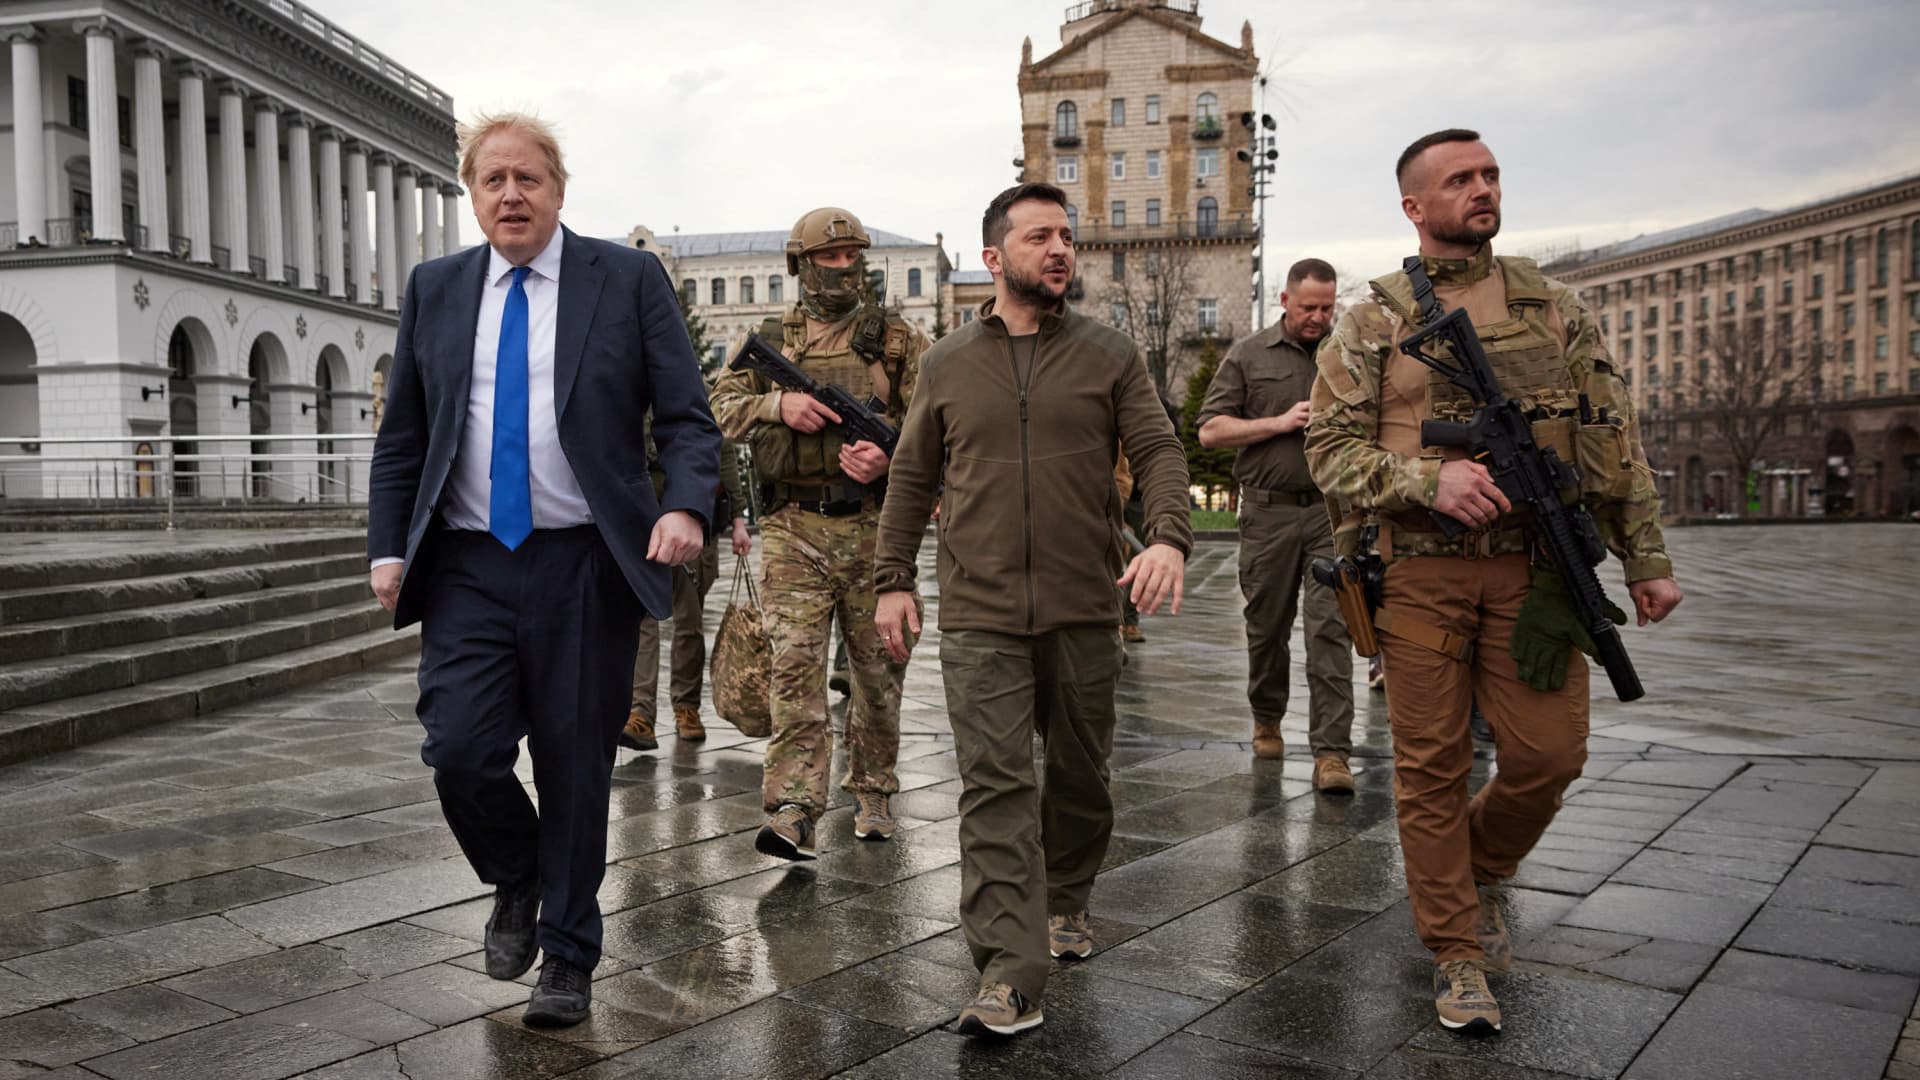 Ukraine's President Volodymyr Zelenskyy and British Prime Minister Boris Johnson at Independence Square after a meeting on April 9, 2022.